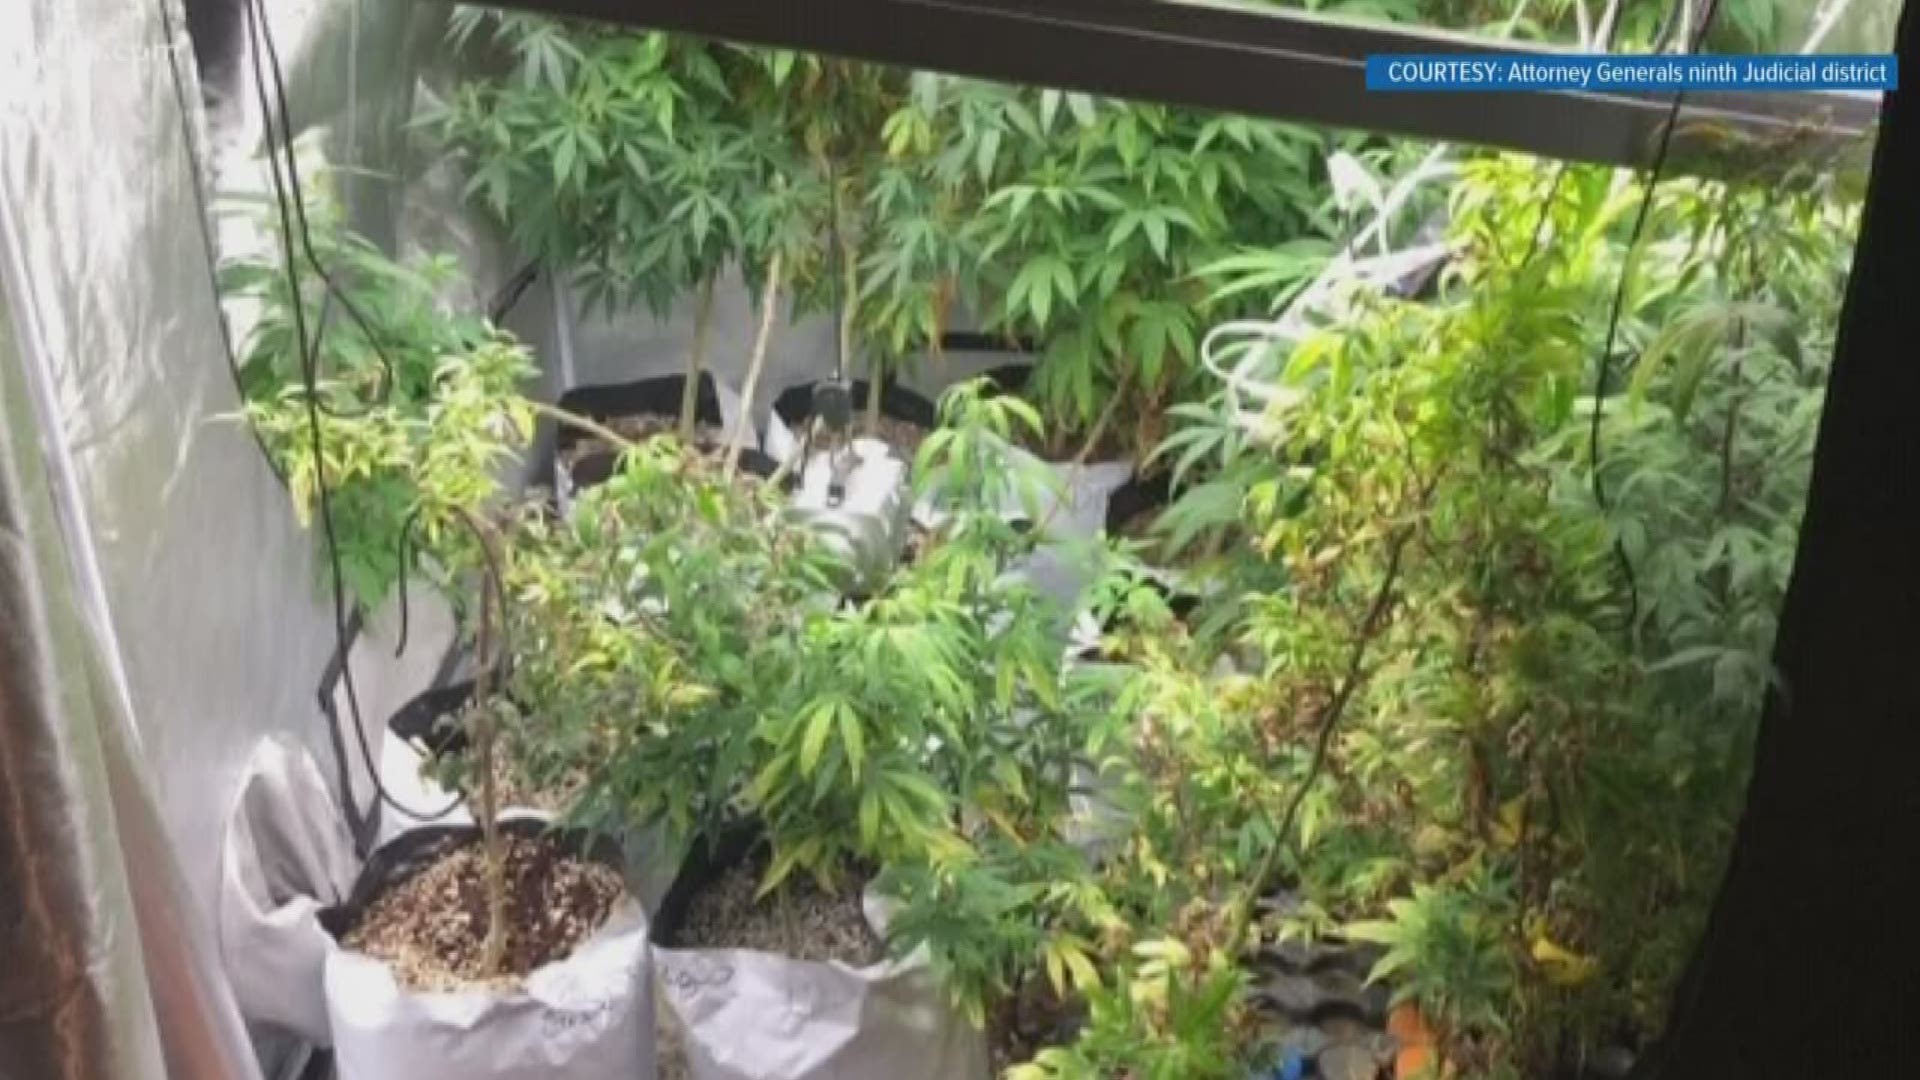 Lenoir City Police busted a large indoor marijuana grow operation and arrested the owner of an auto body shop.